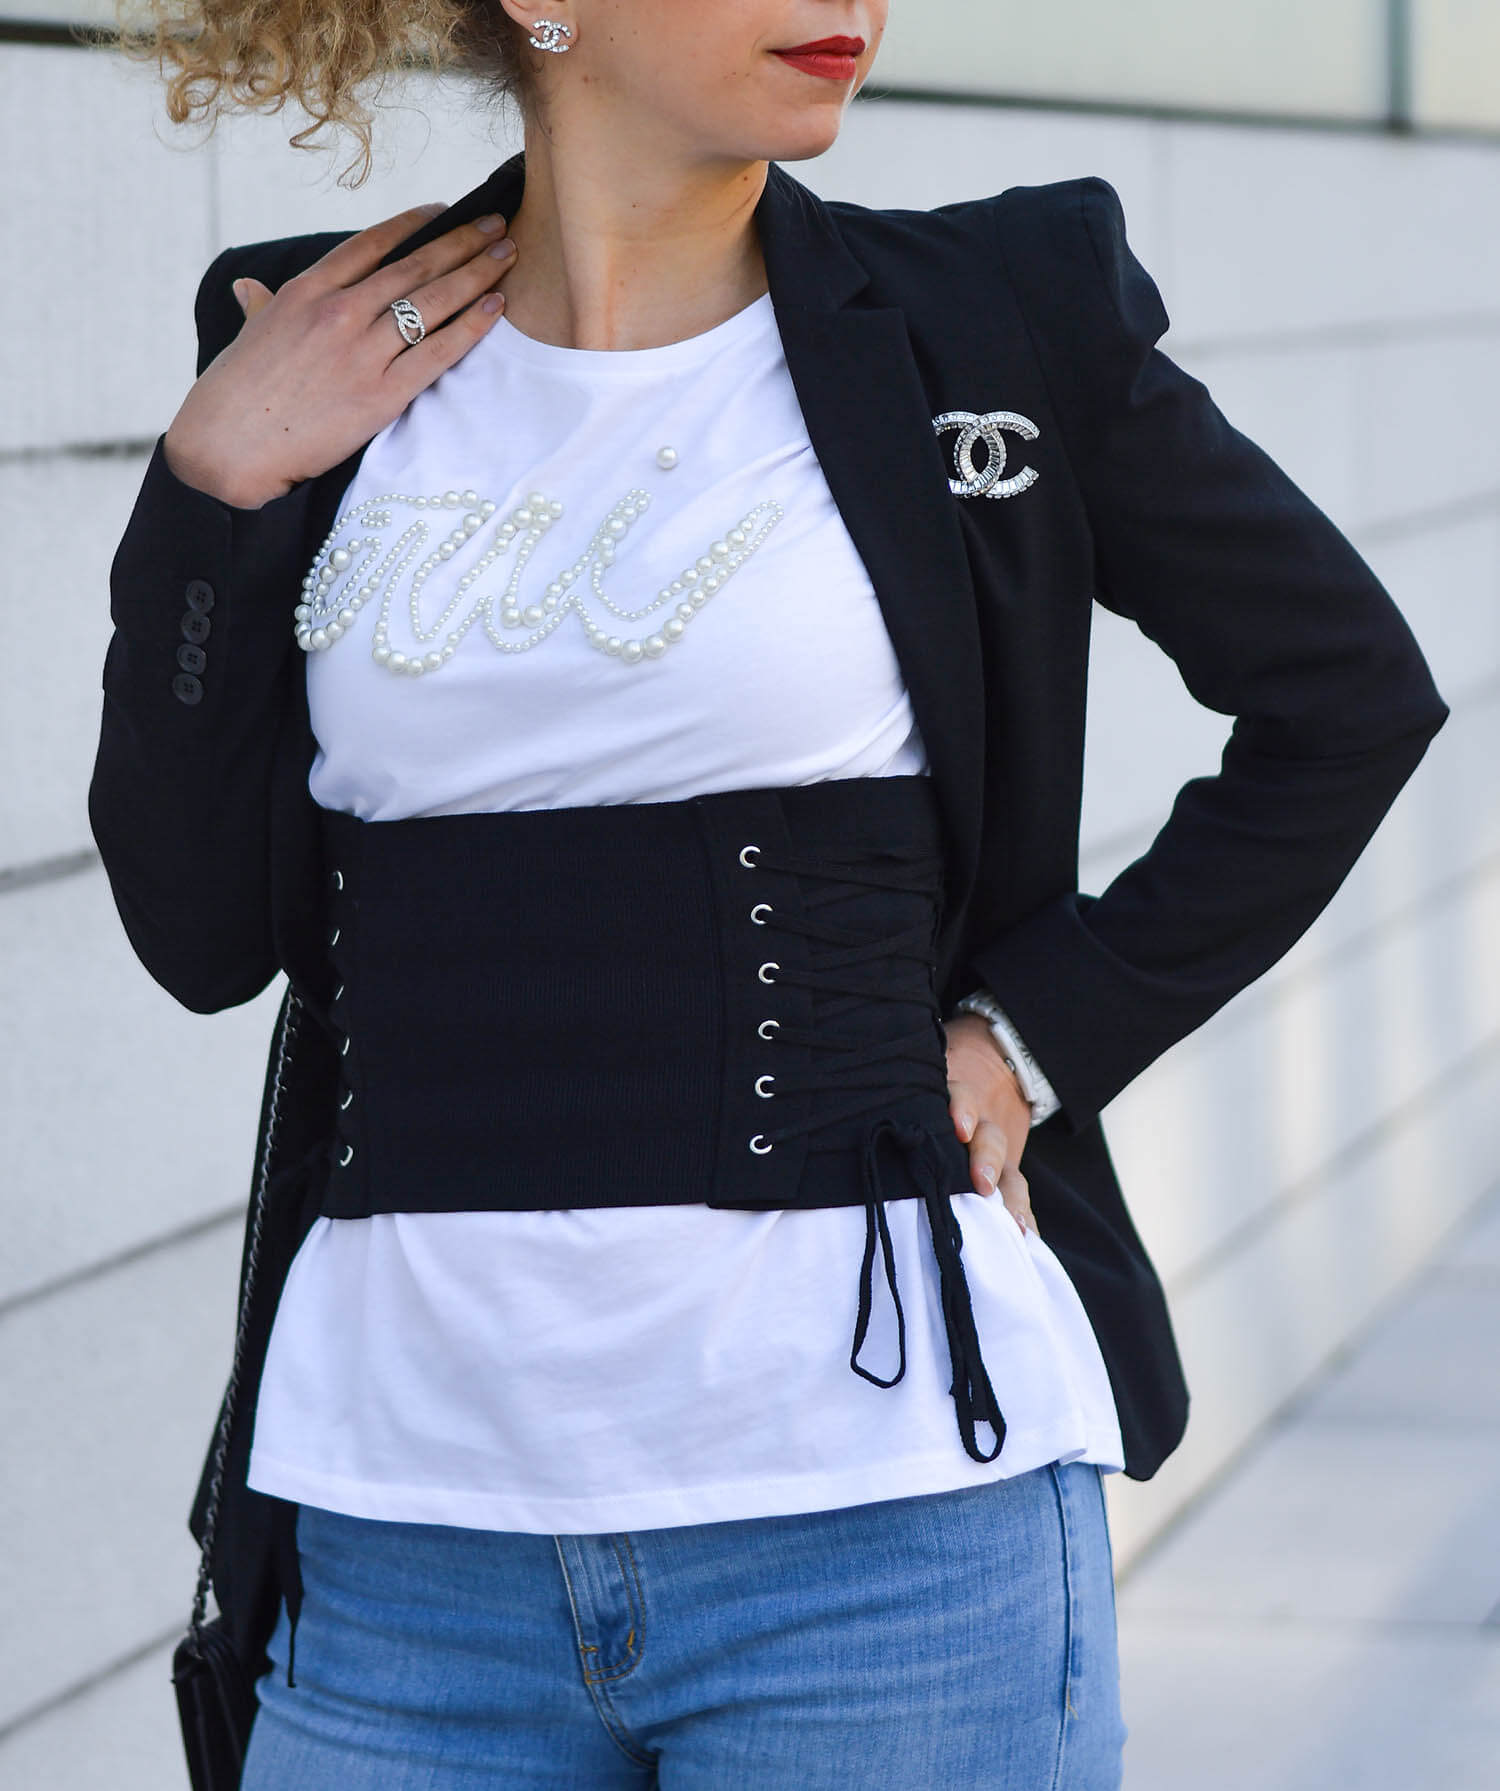 Marionette-fashionblog-nrw-Outfit-Corset-Belt-Pearls-HighHeels-Chanel-streetstyle